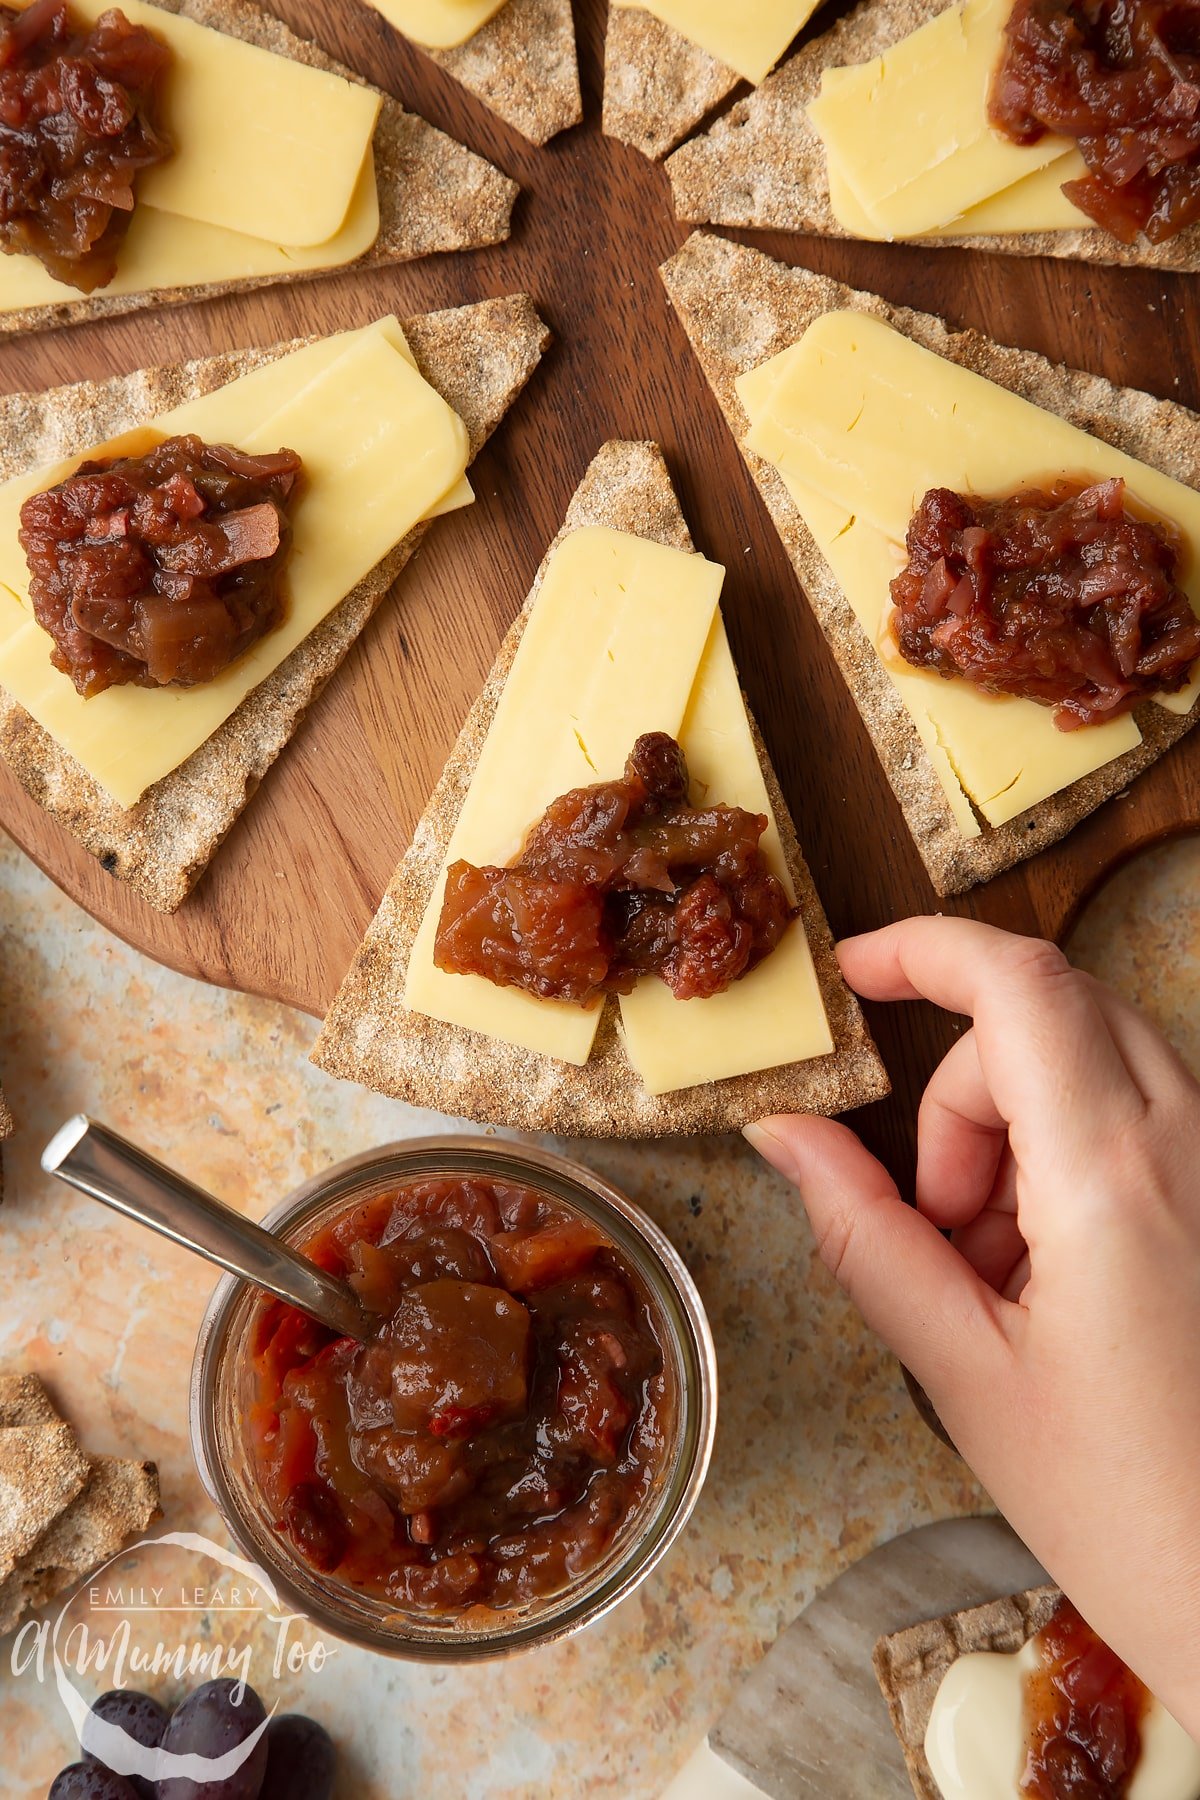 Triangular crackers topped with cheese slices and a fruit chutney recipe on a wooden board, next to a jar of chutney. A hand reaches to take a cracker.